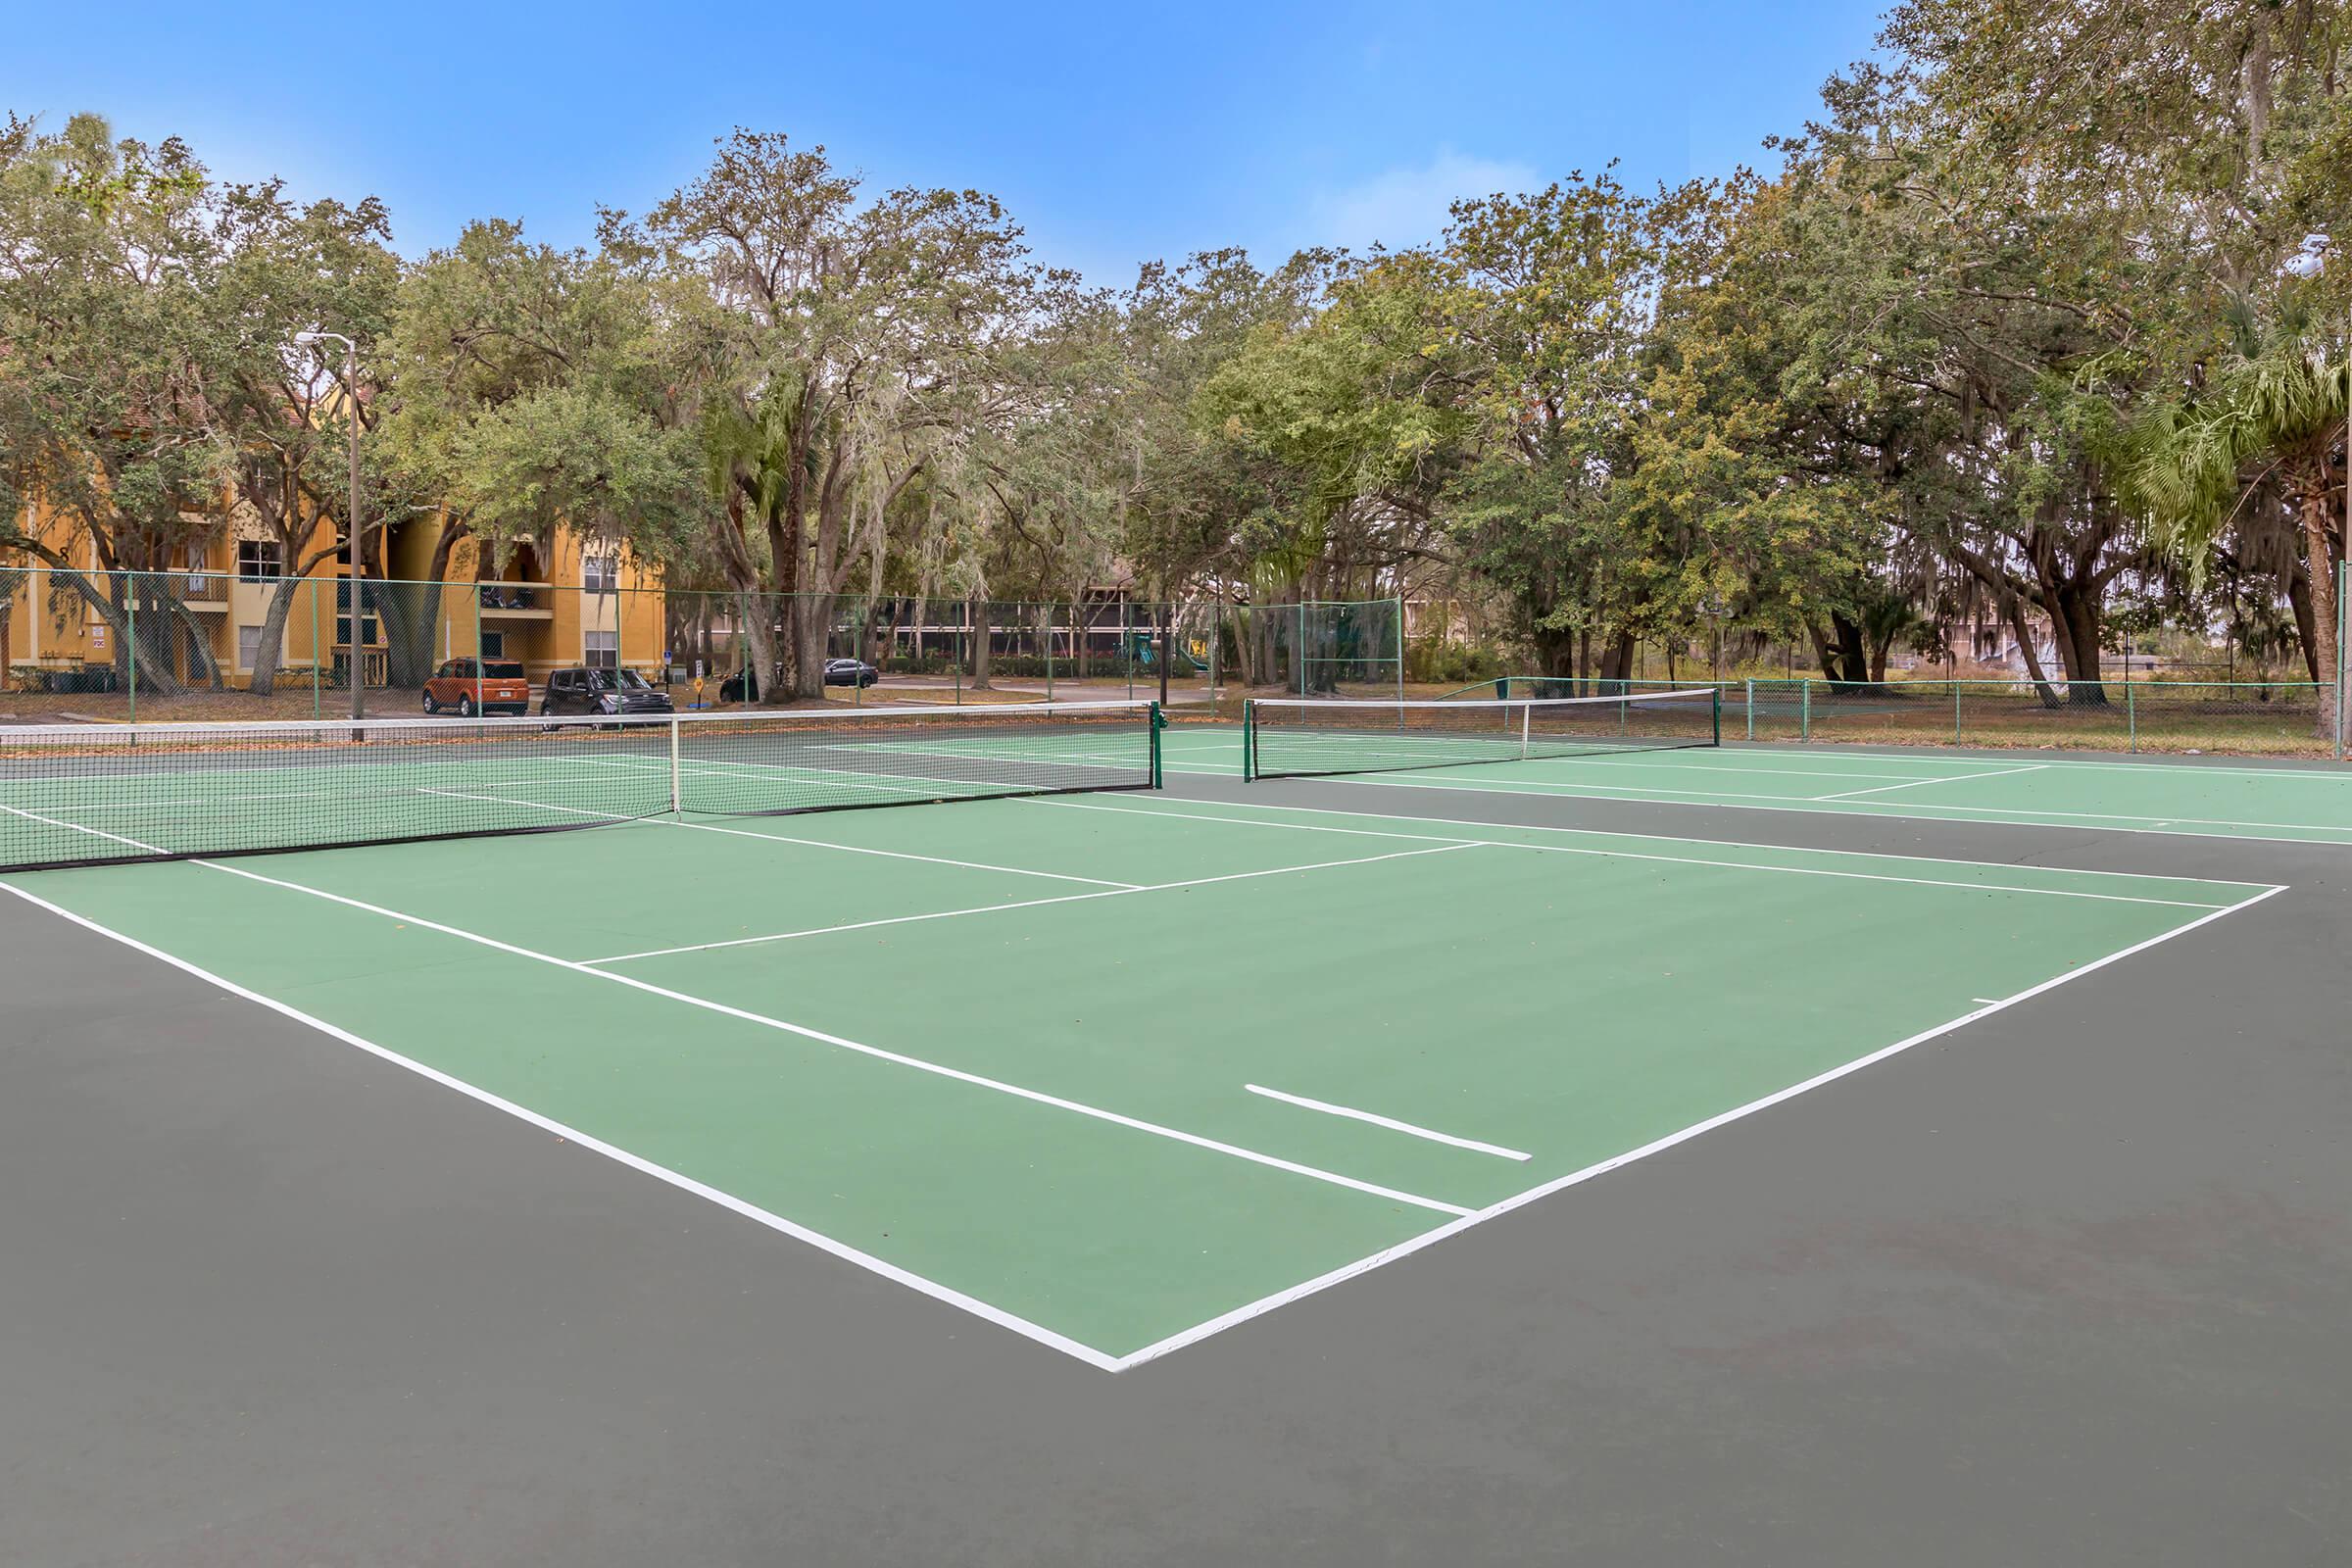 View amenities like our tennis court at Kissimmee, Florida